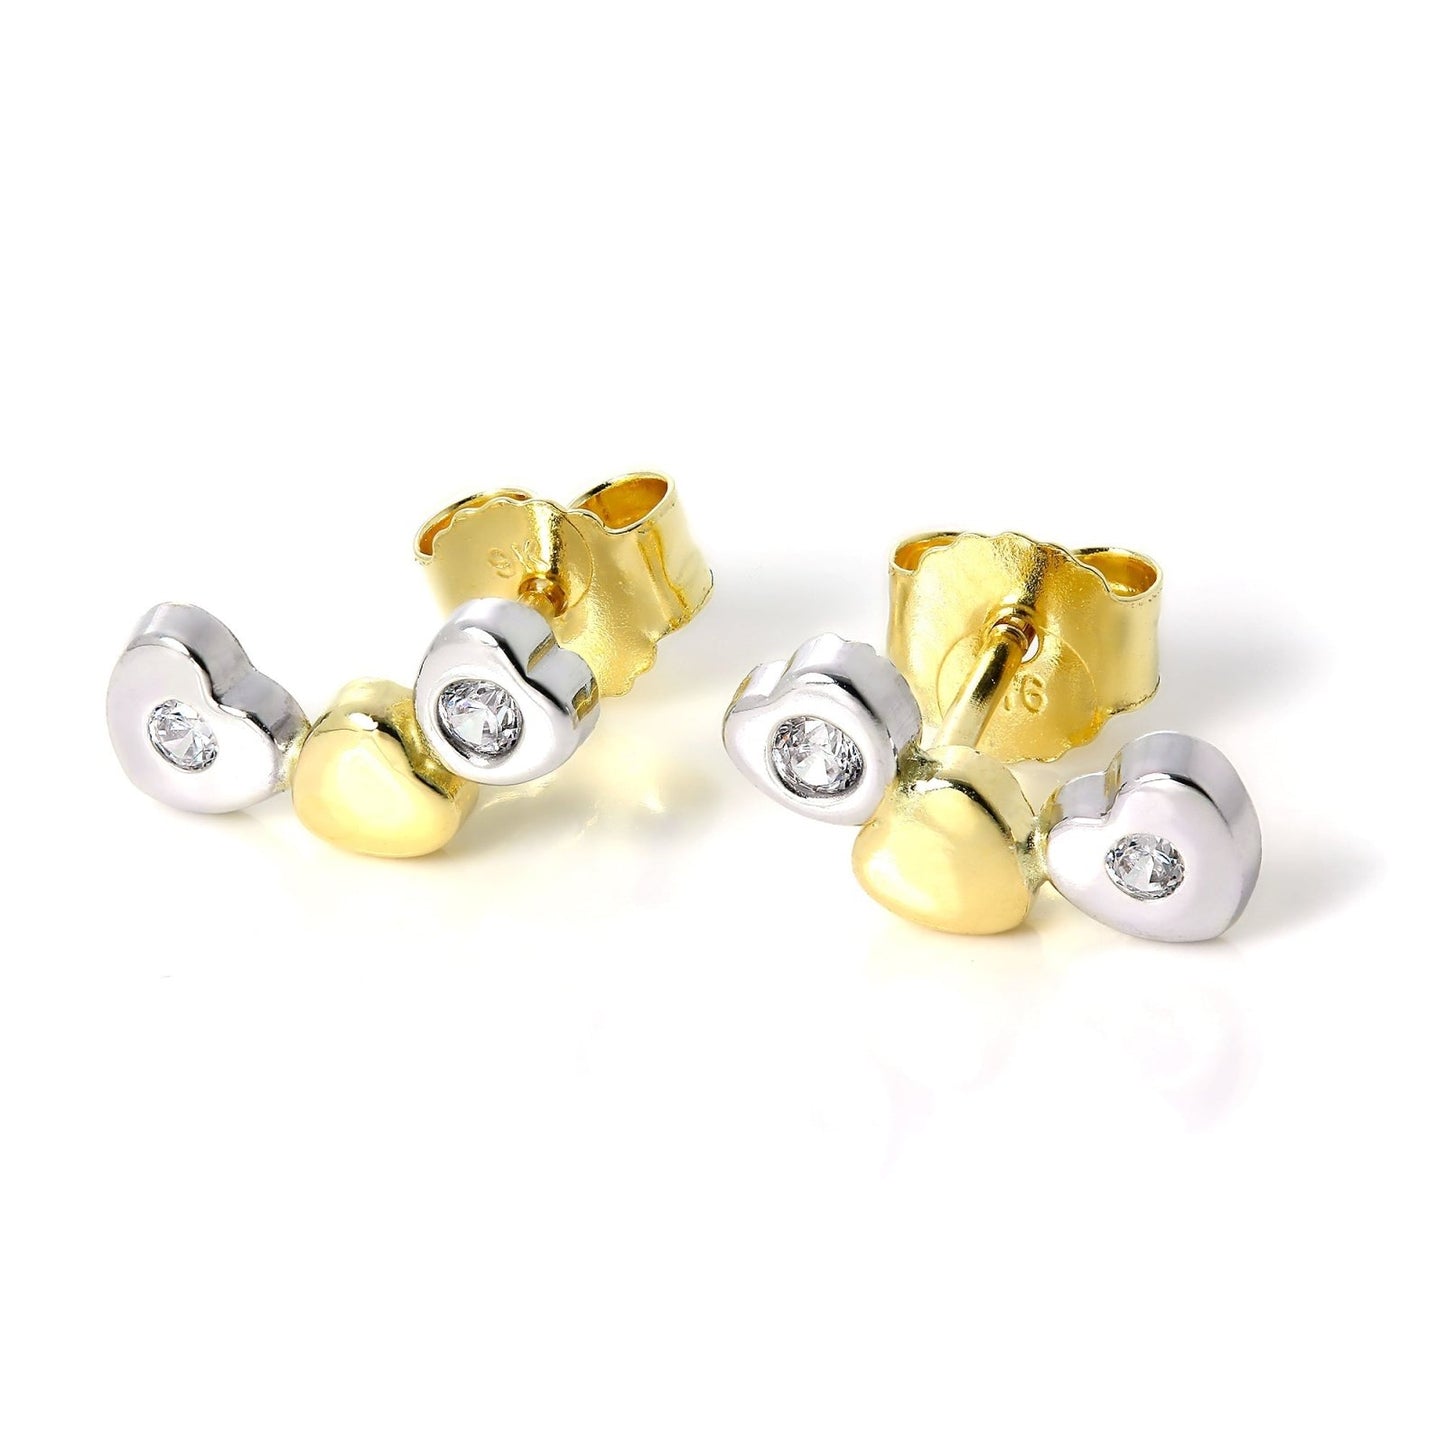 9ct White & Yellow Gold Triple Heart Stud Earrings with CZ Crystals - jewellerybox